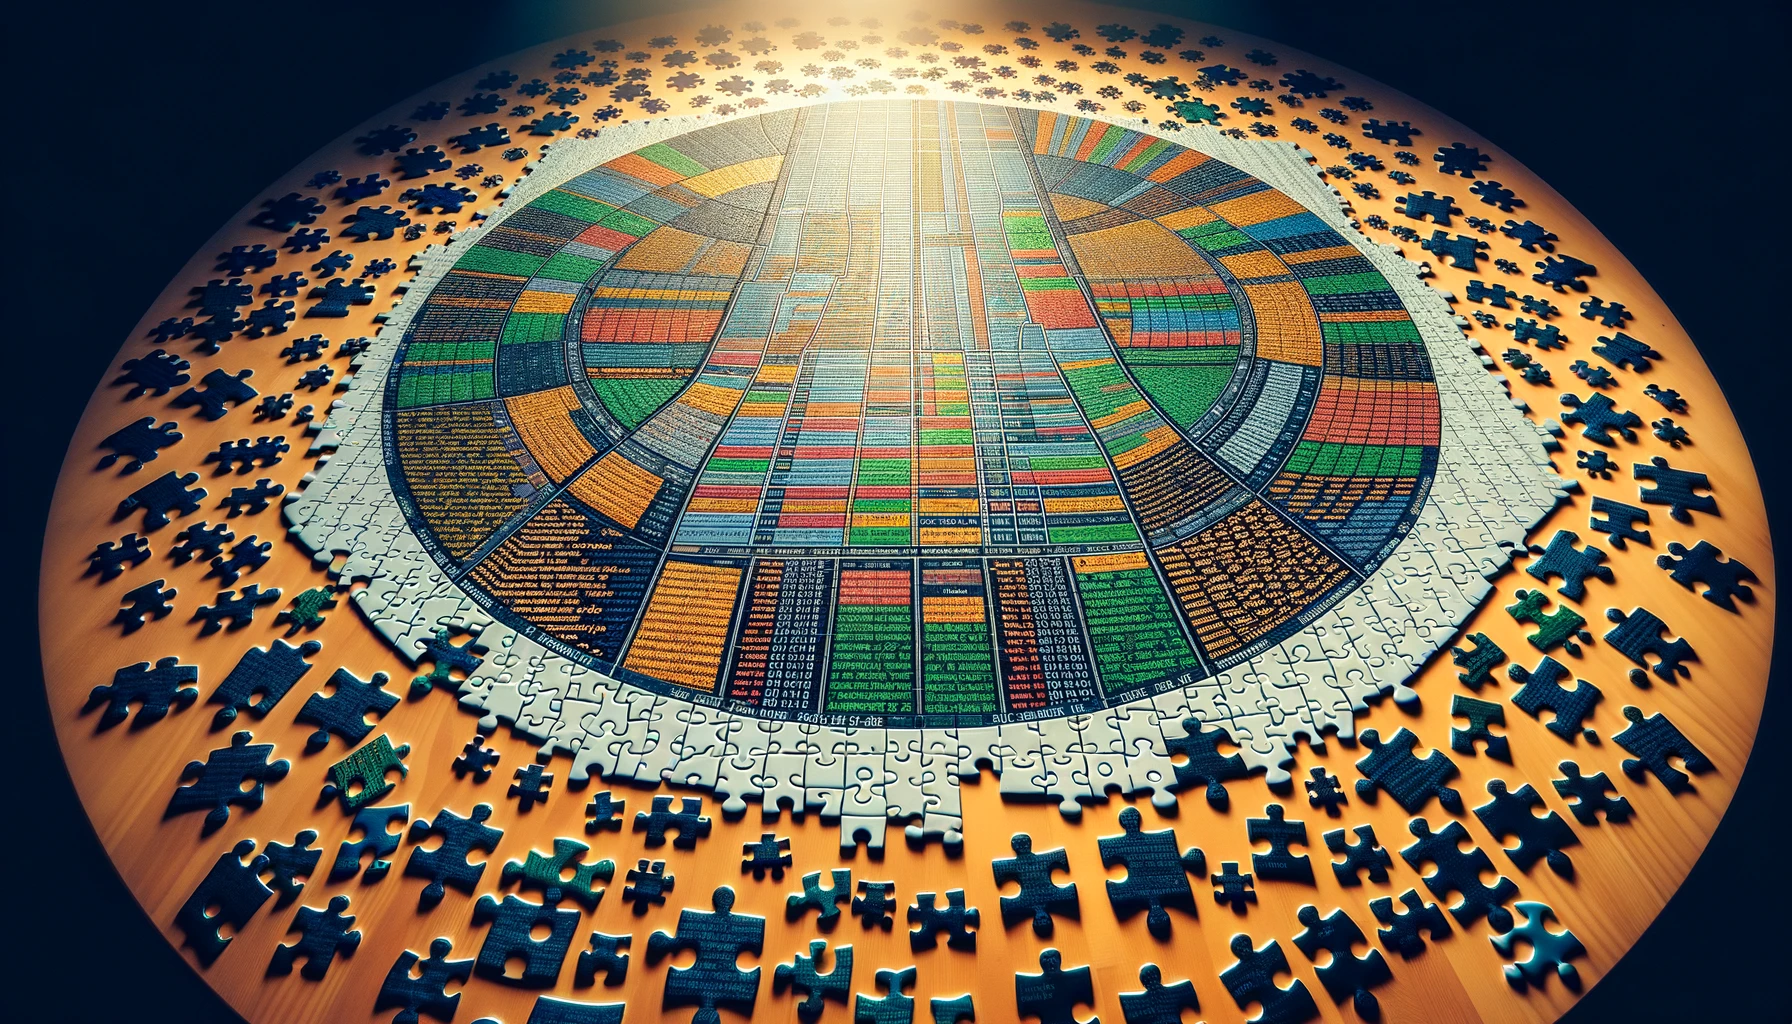 Photo of a large, intricate jigsaw puzzle on a table with pieces made out of JSON code snippets. The puzzle is almost complete, showing a nearly finished image of a database table with rows and columns. Some puzzle pieces are still scattered around, waiting to be placed. The light source above casts a warm glow, highlighting the complexity and the various colors of the JSON data. This represents the process of defining a PySpark schema in a data pipeline.